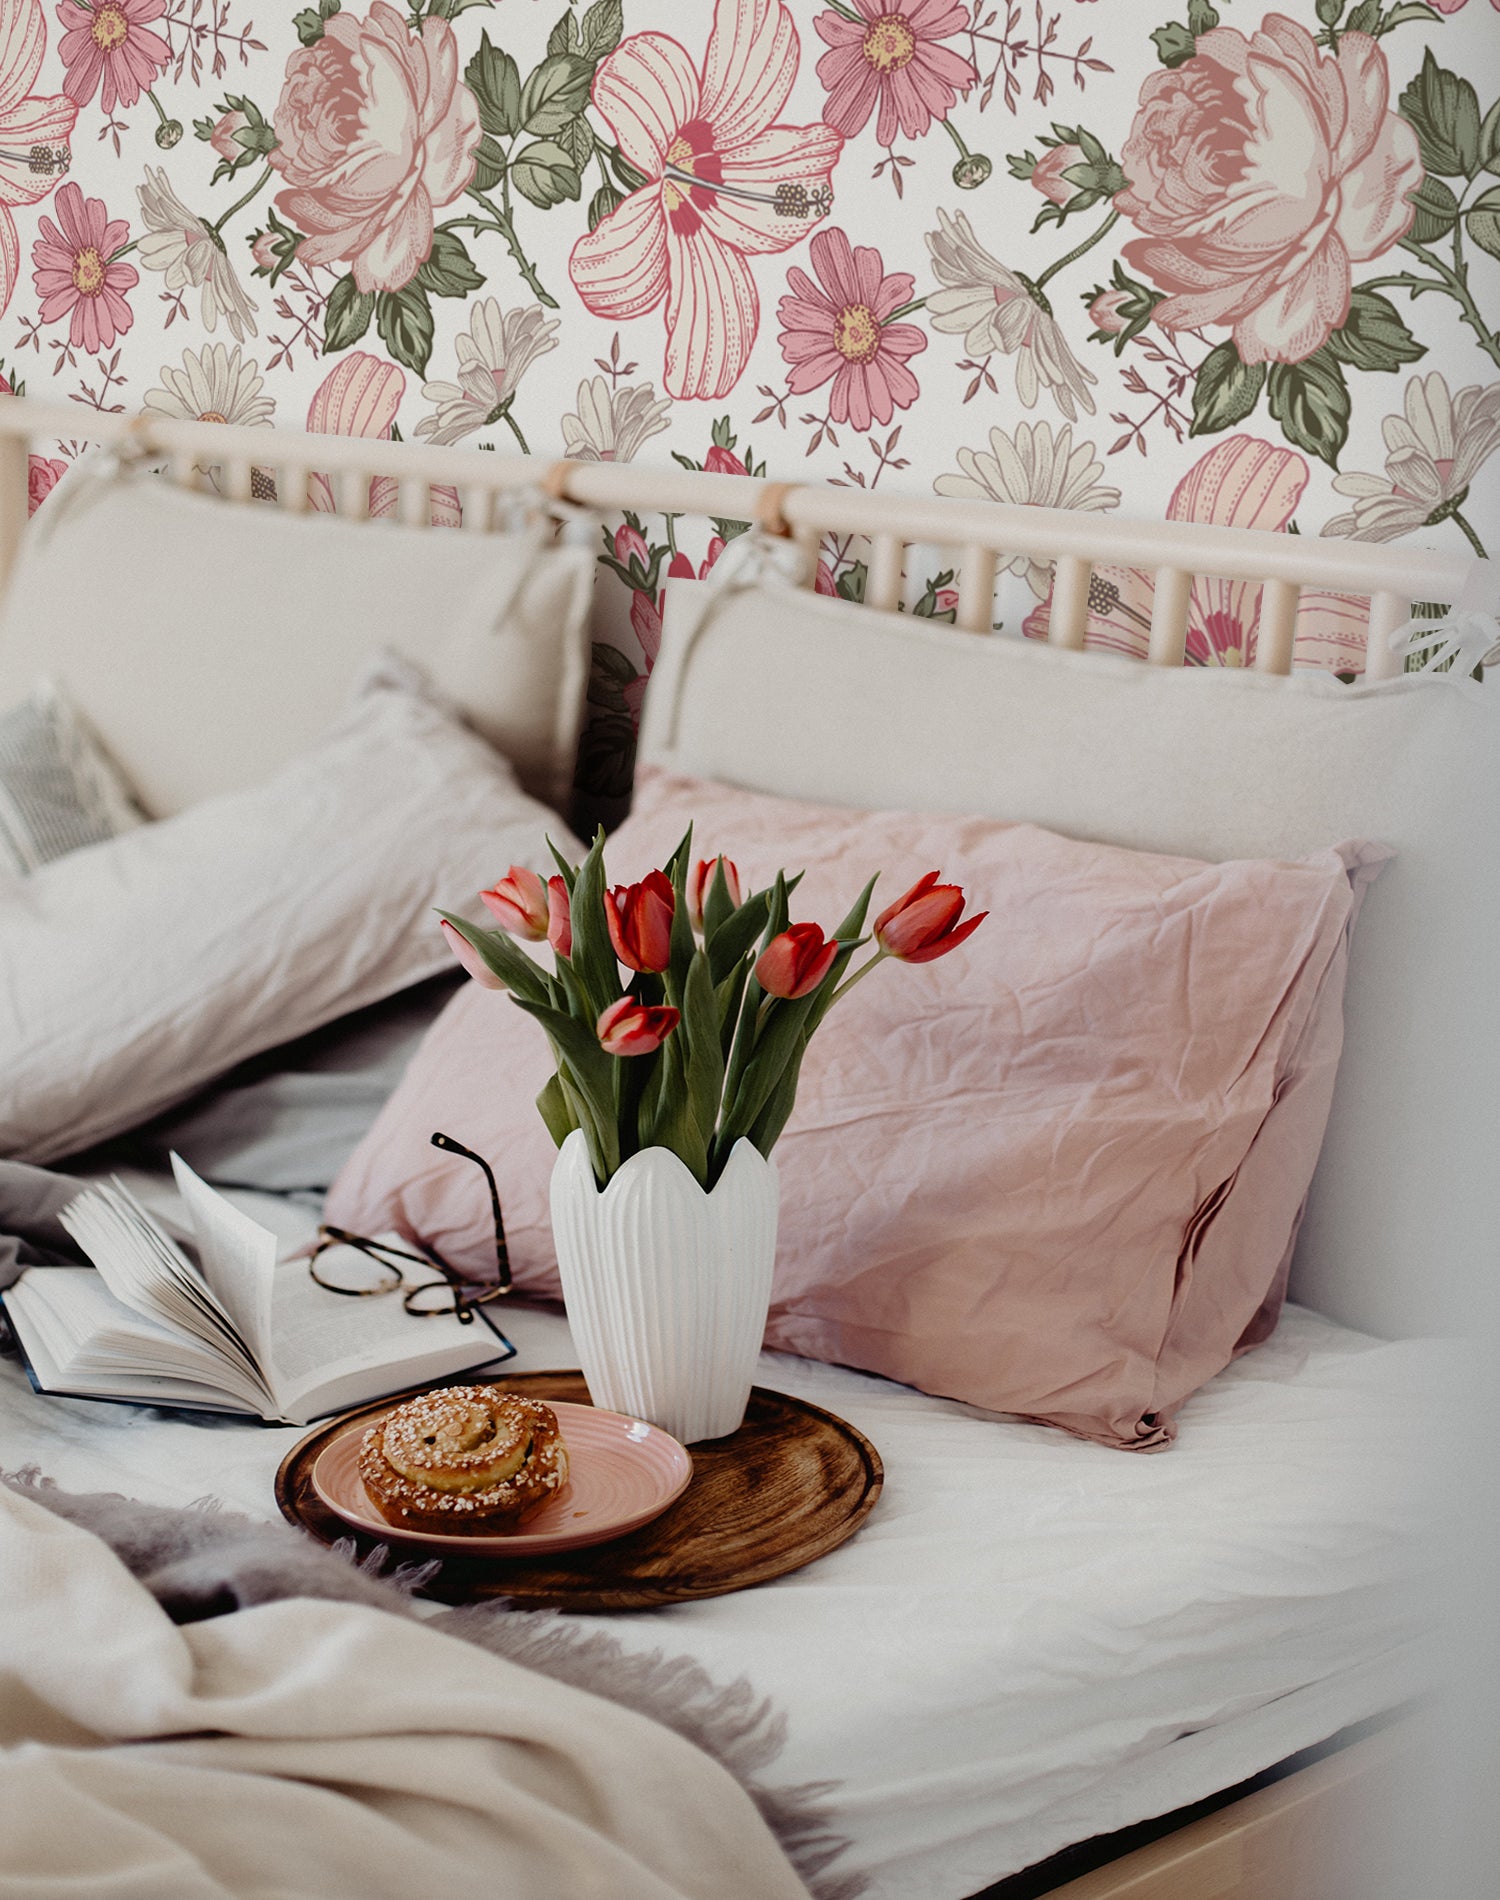 A cozy bedroom setting with the Floral Wallpaper - Berry Pink, featuring large berry-pink roses and various pink-toned flowers creating a vibrant and romantic botanical scene behind a bed adorned with soft linens and a vase of red tulips.